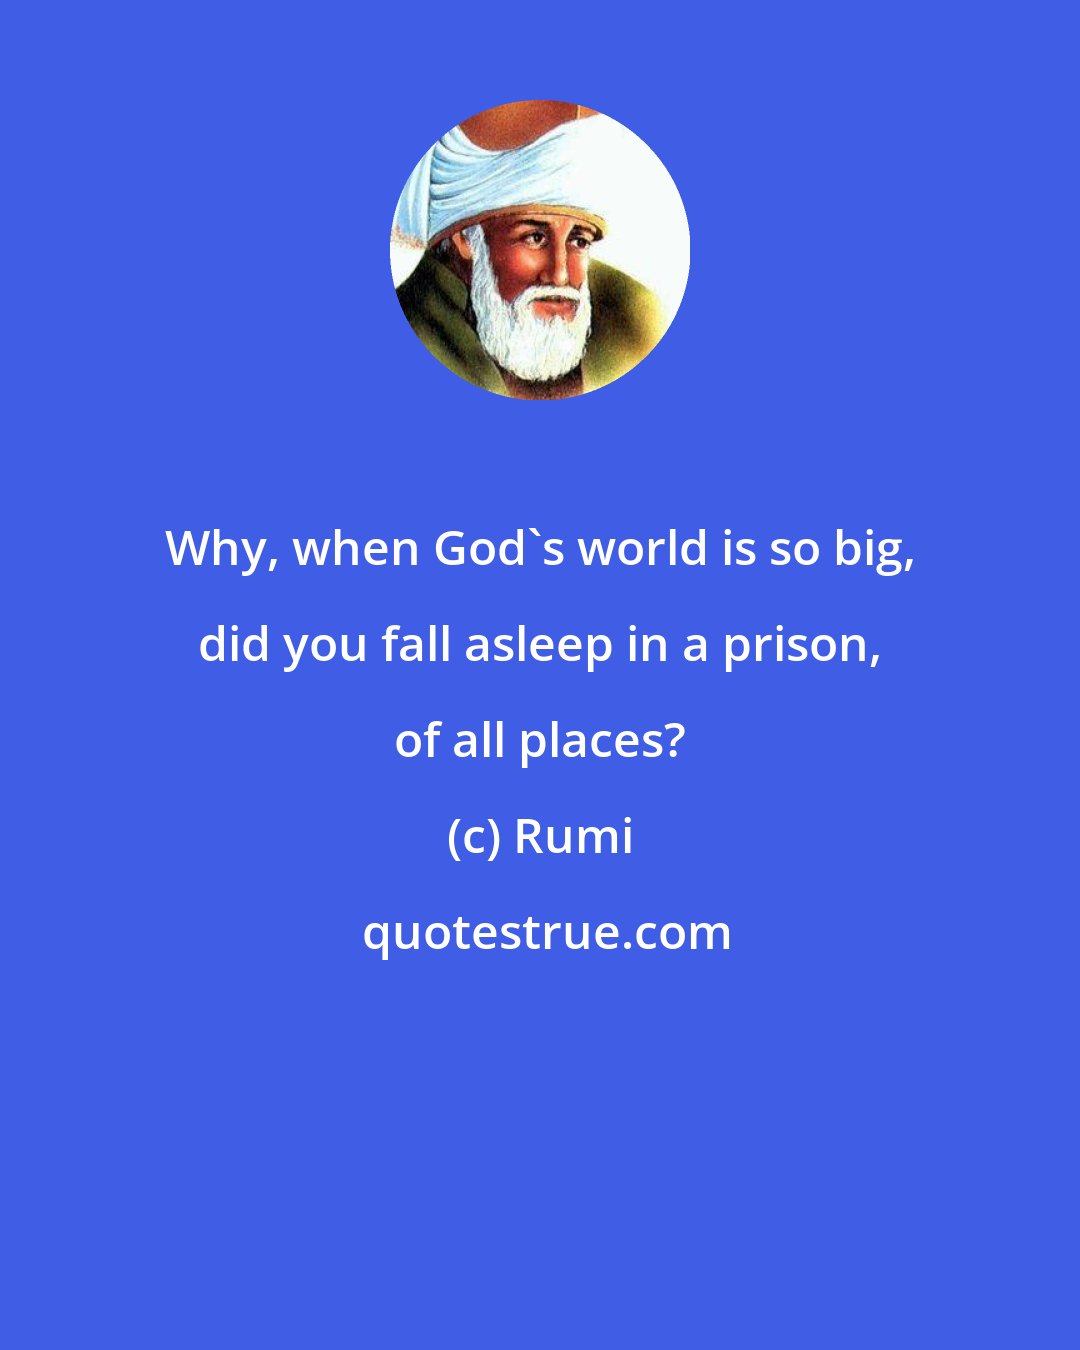 Rumi: Why, when God's world is so big, did you fall asleep in a prison, of all places?